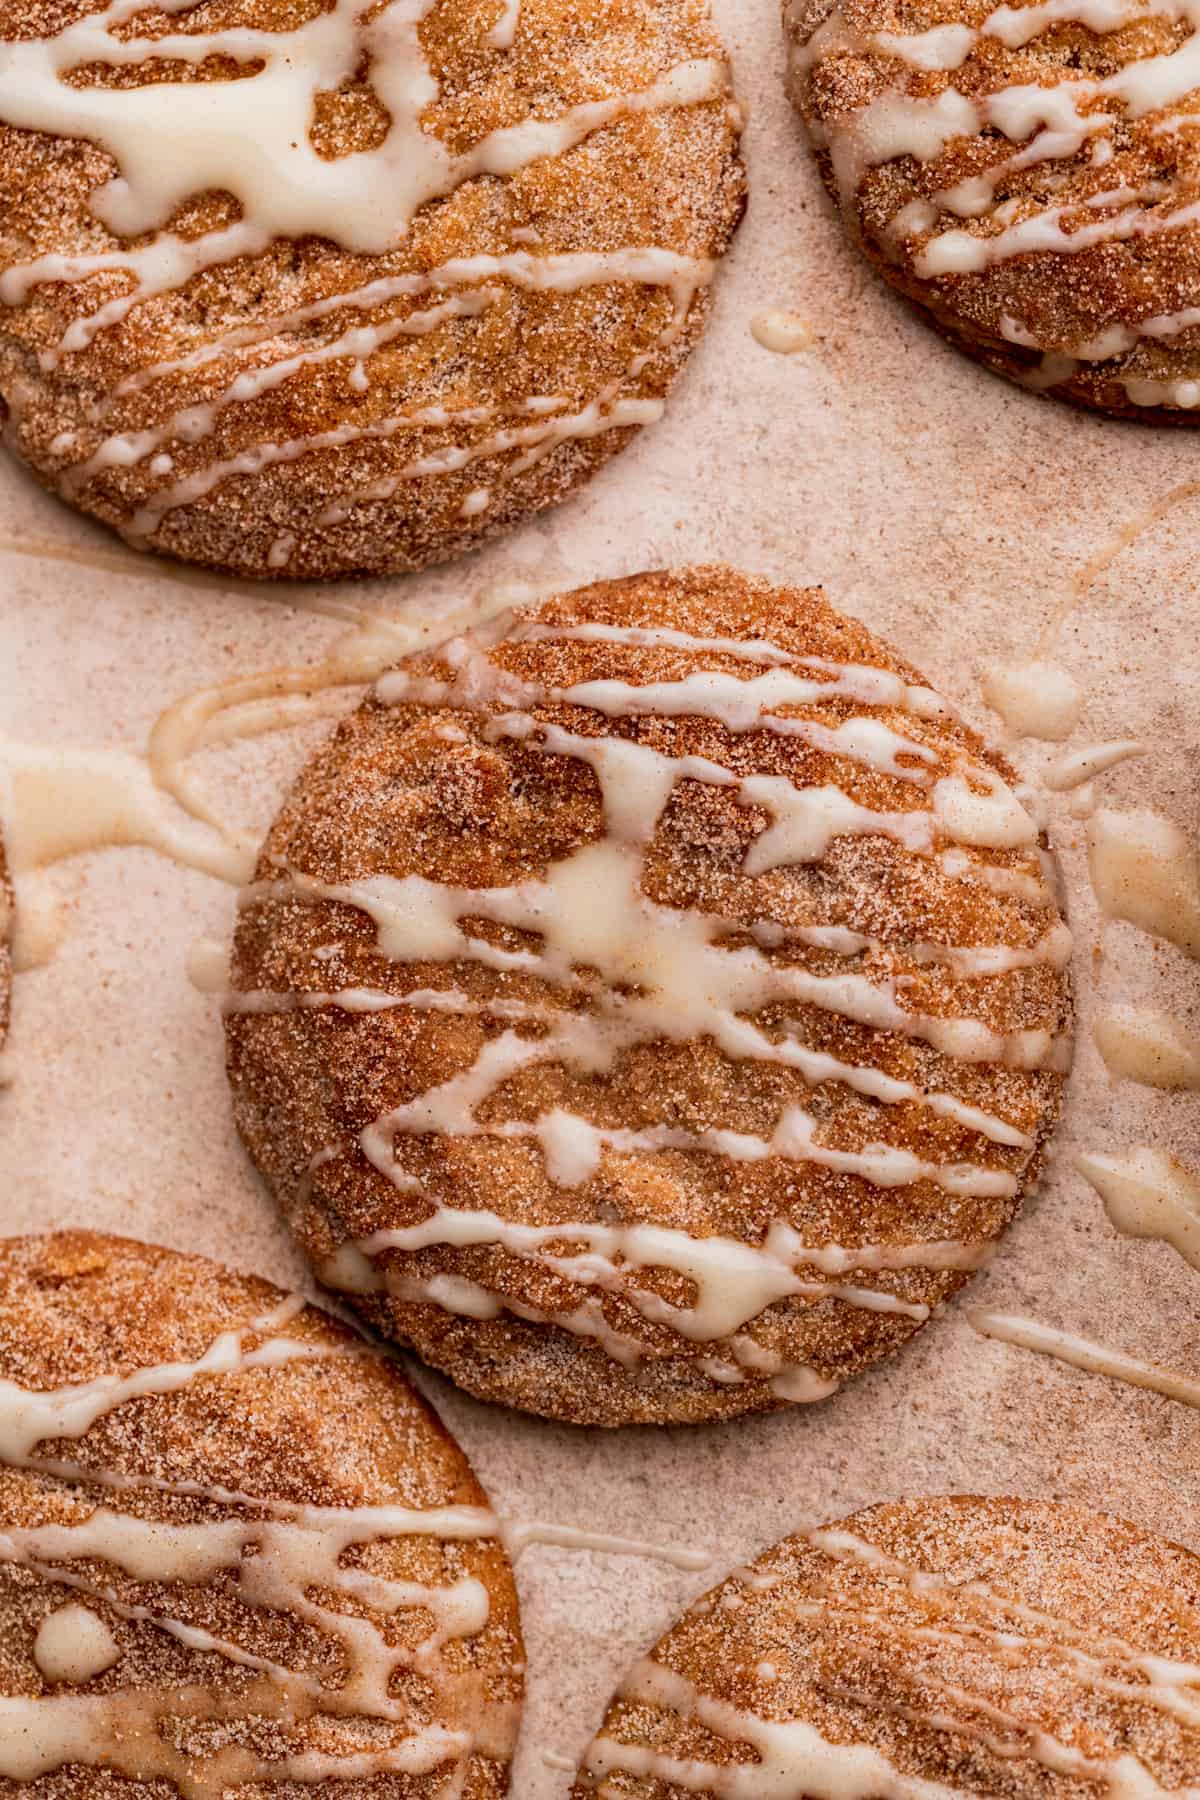 Apple cider cookies with an apple cider glaze on top.